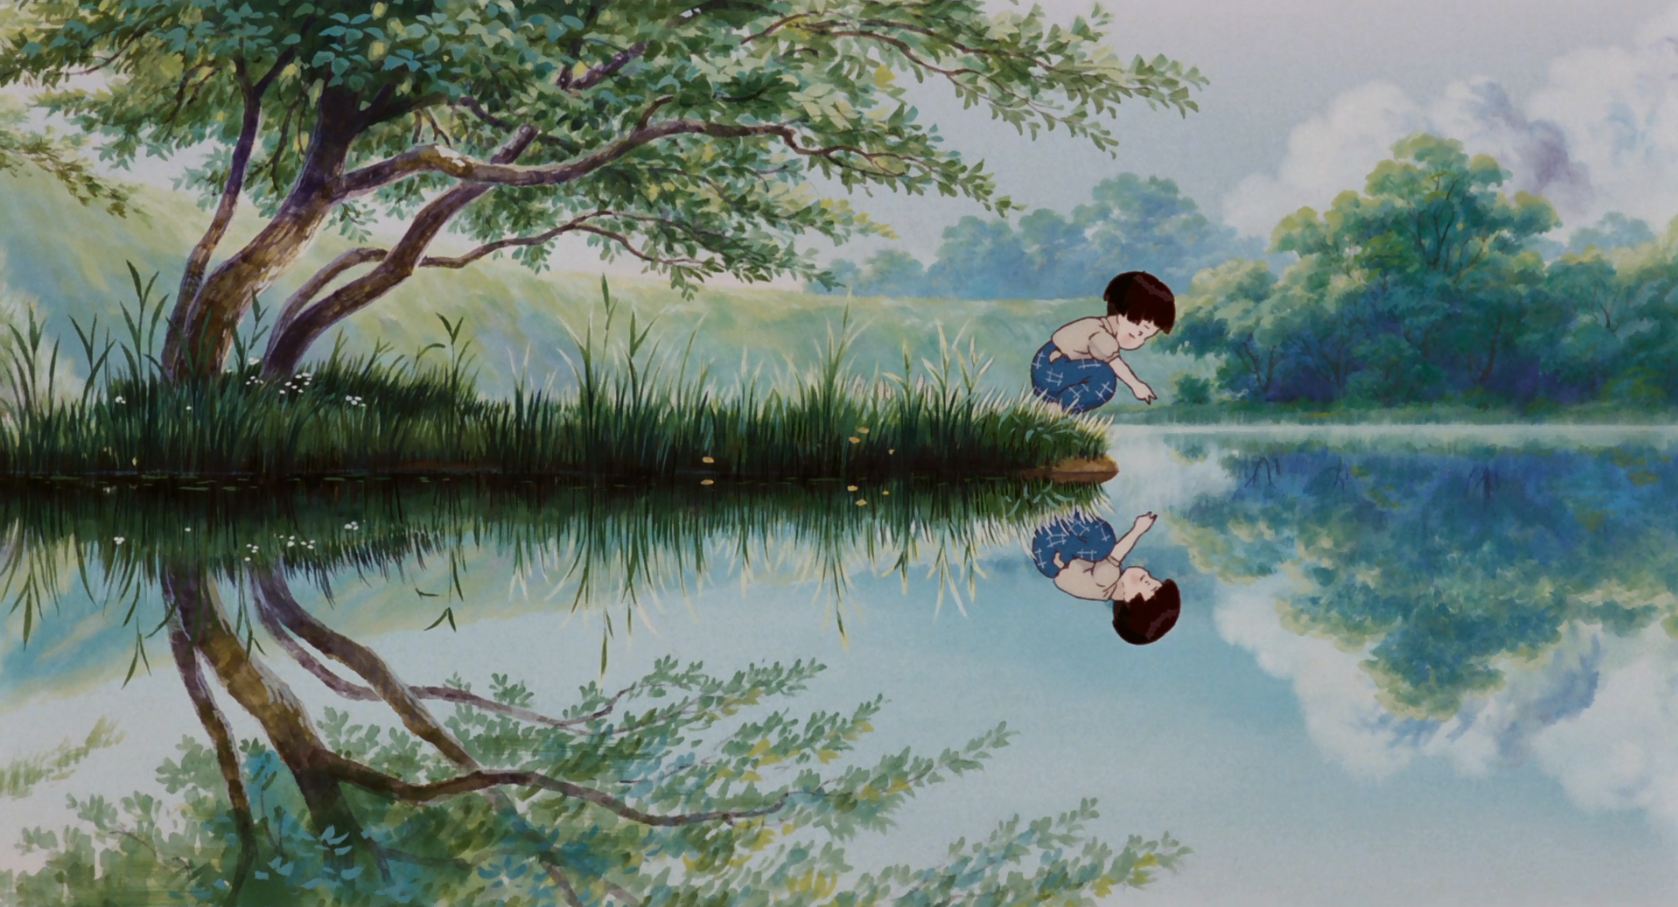 Anime Review: Grave of the Fireflies (1988) by Isao Takahata